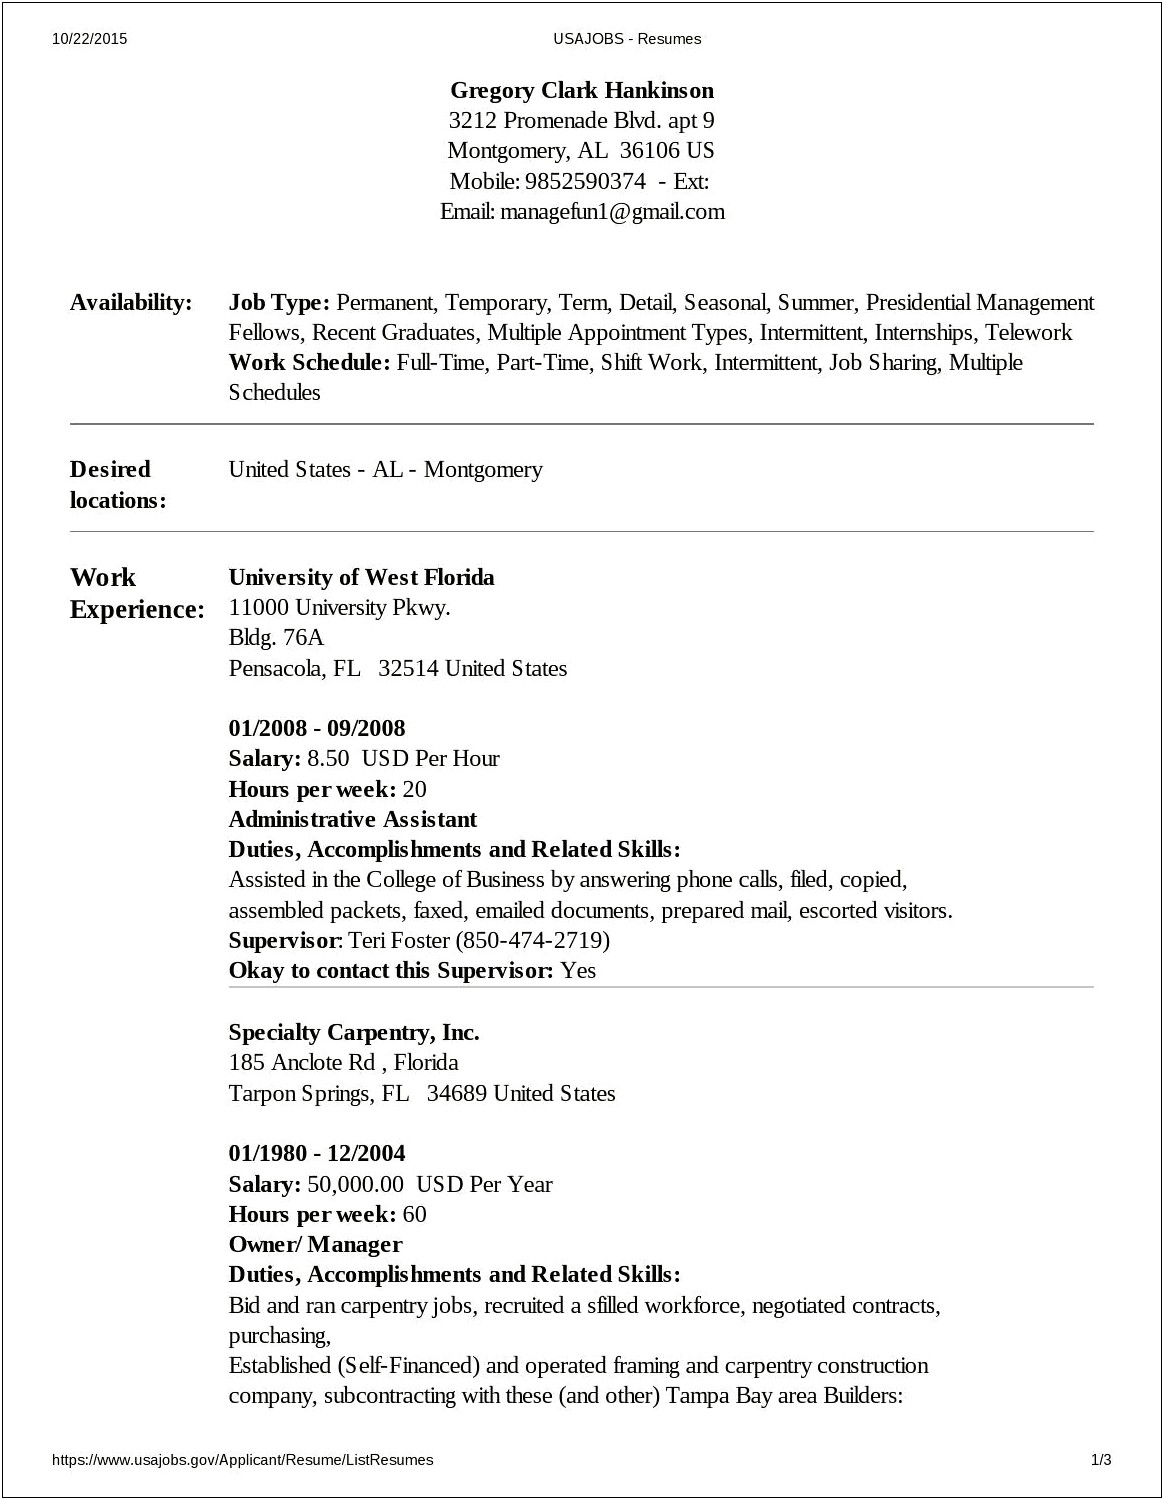 Example Of A Resume For Usajobs.gov